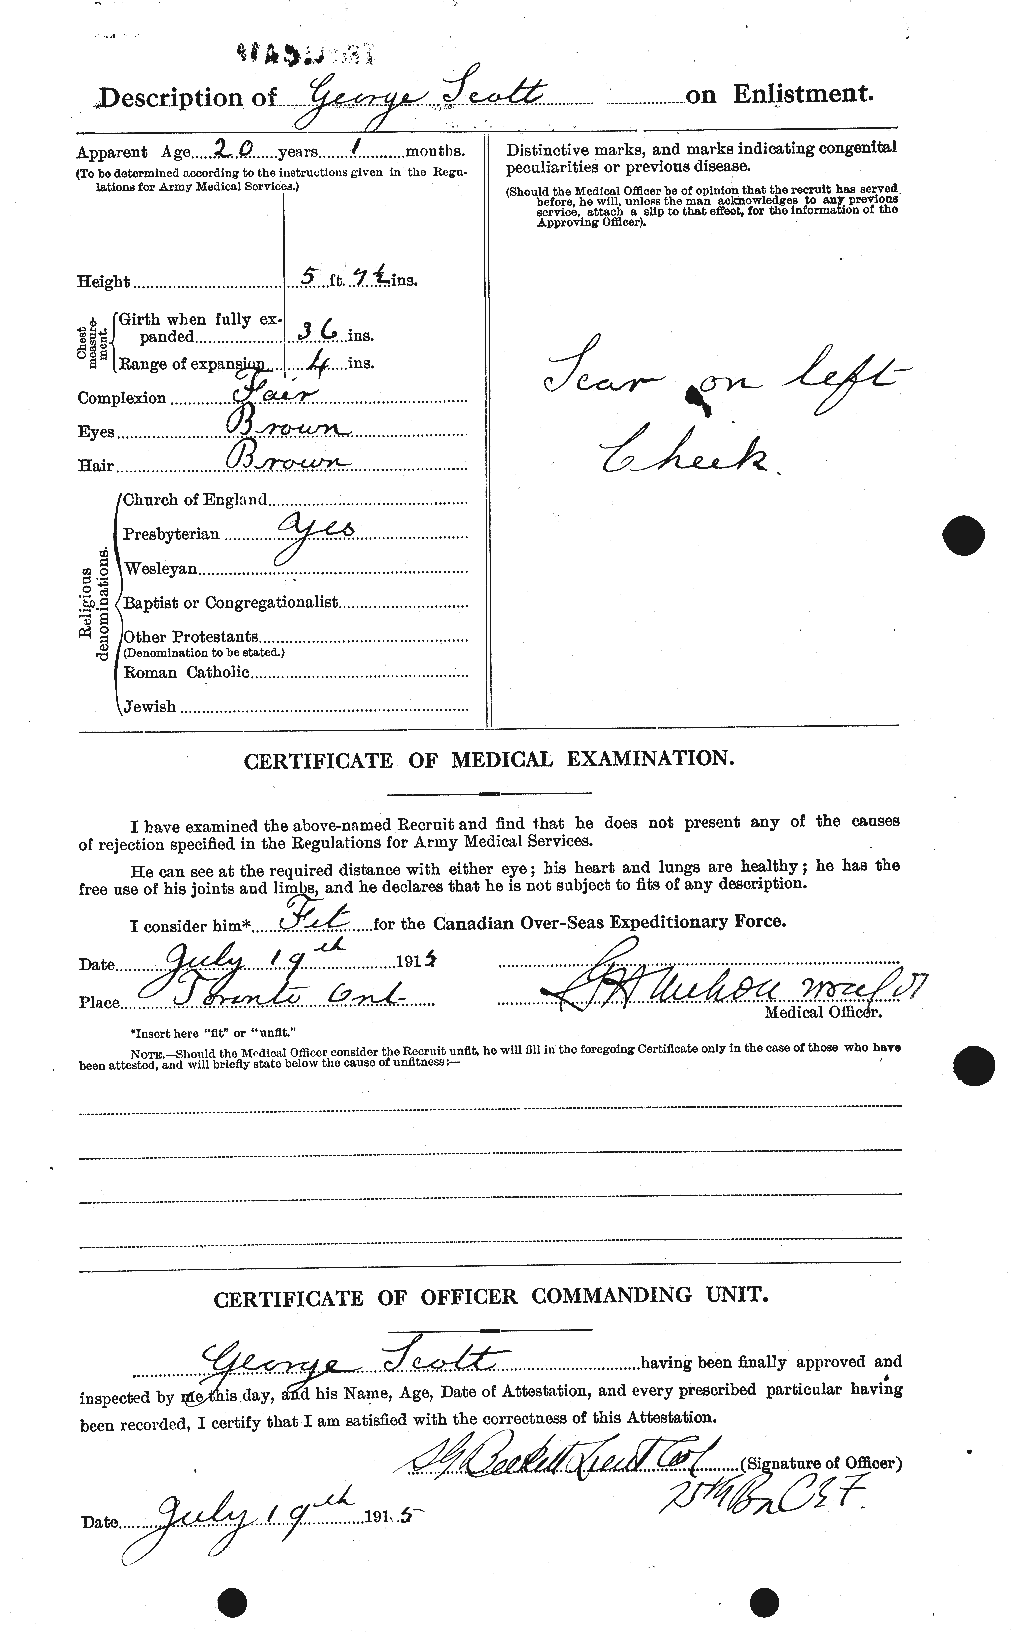 Personnel Records of the First World War - CEF 083586b